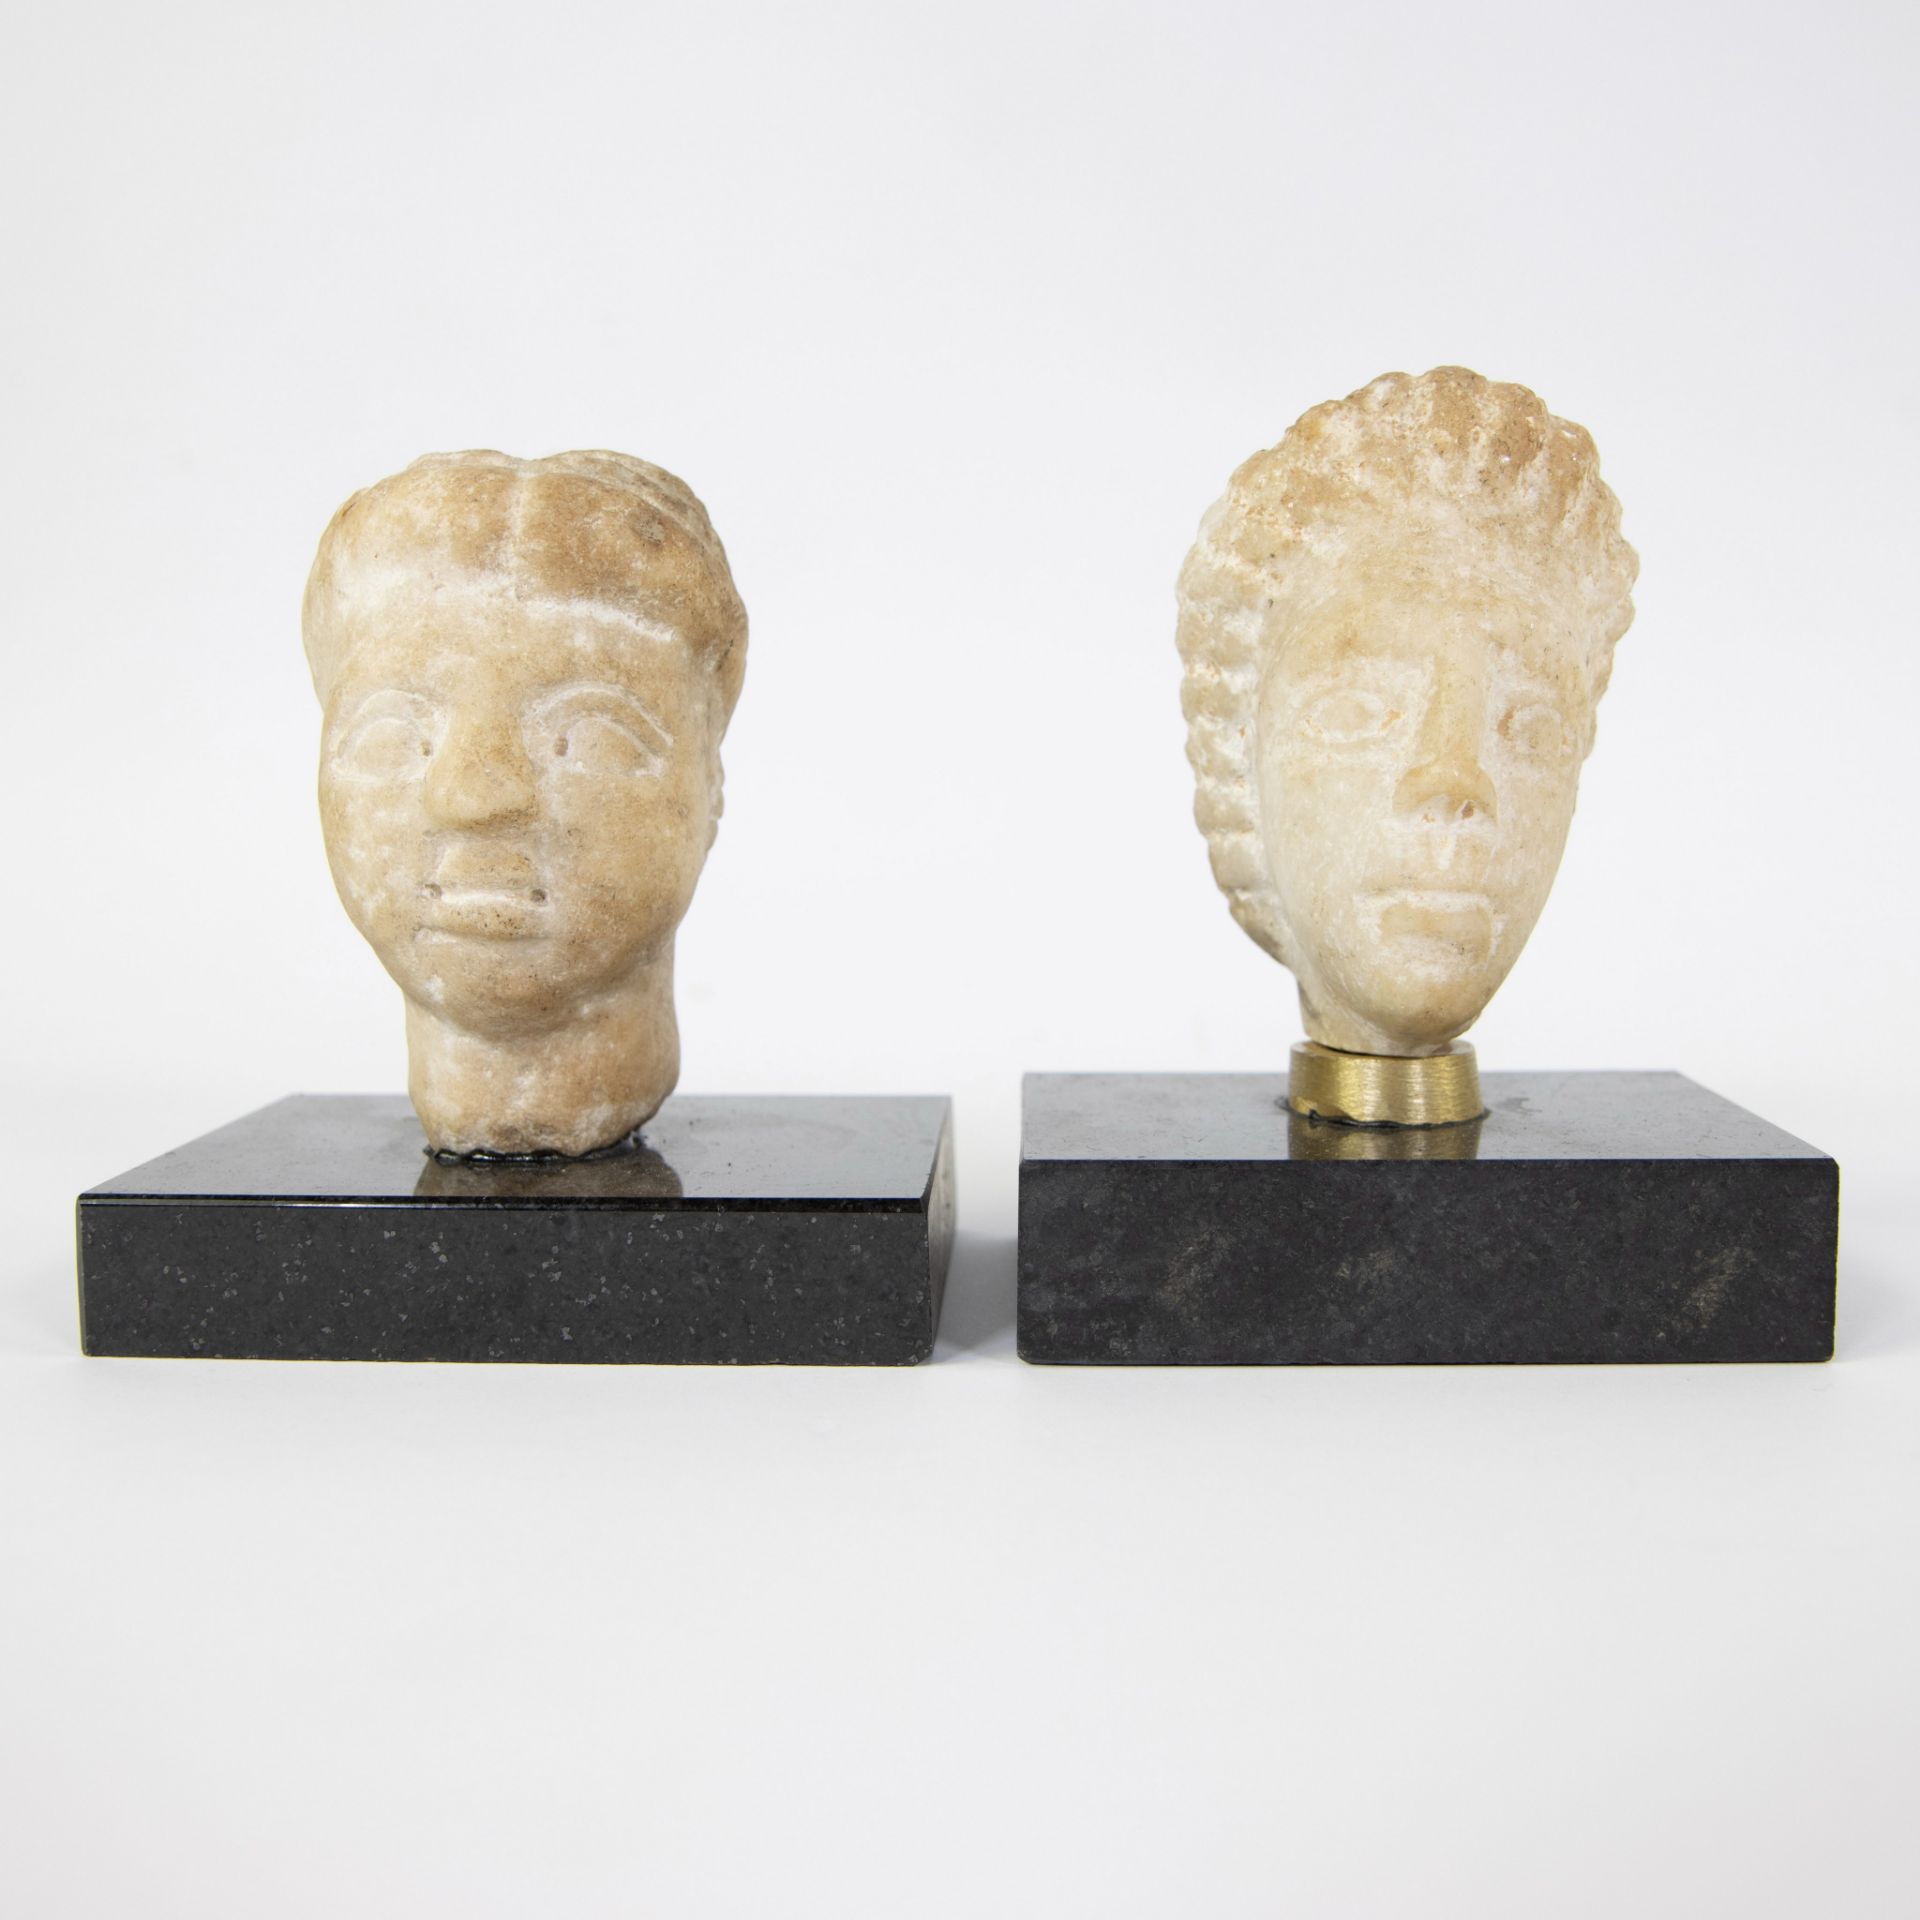 2 Roman heads in white stone on marble base